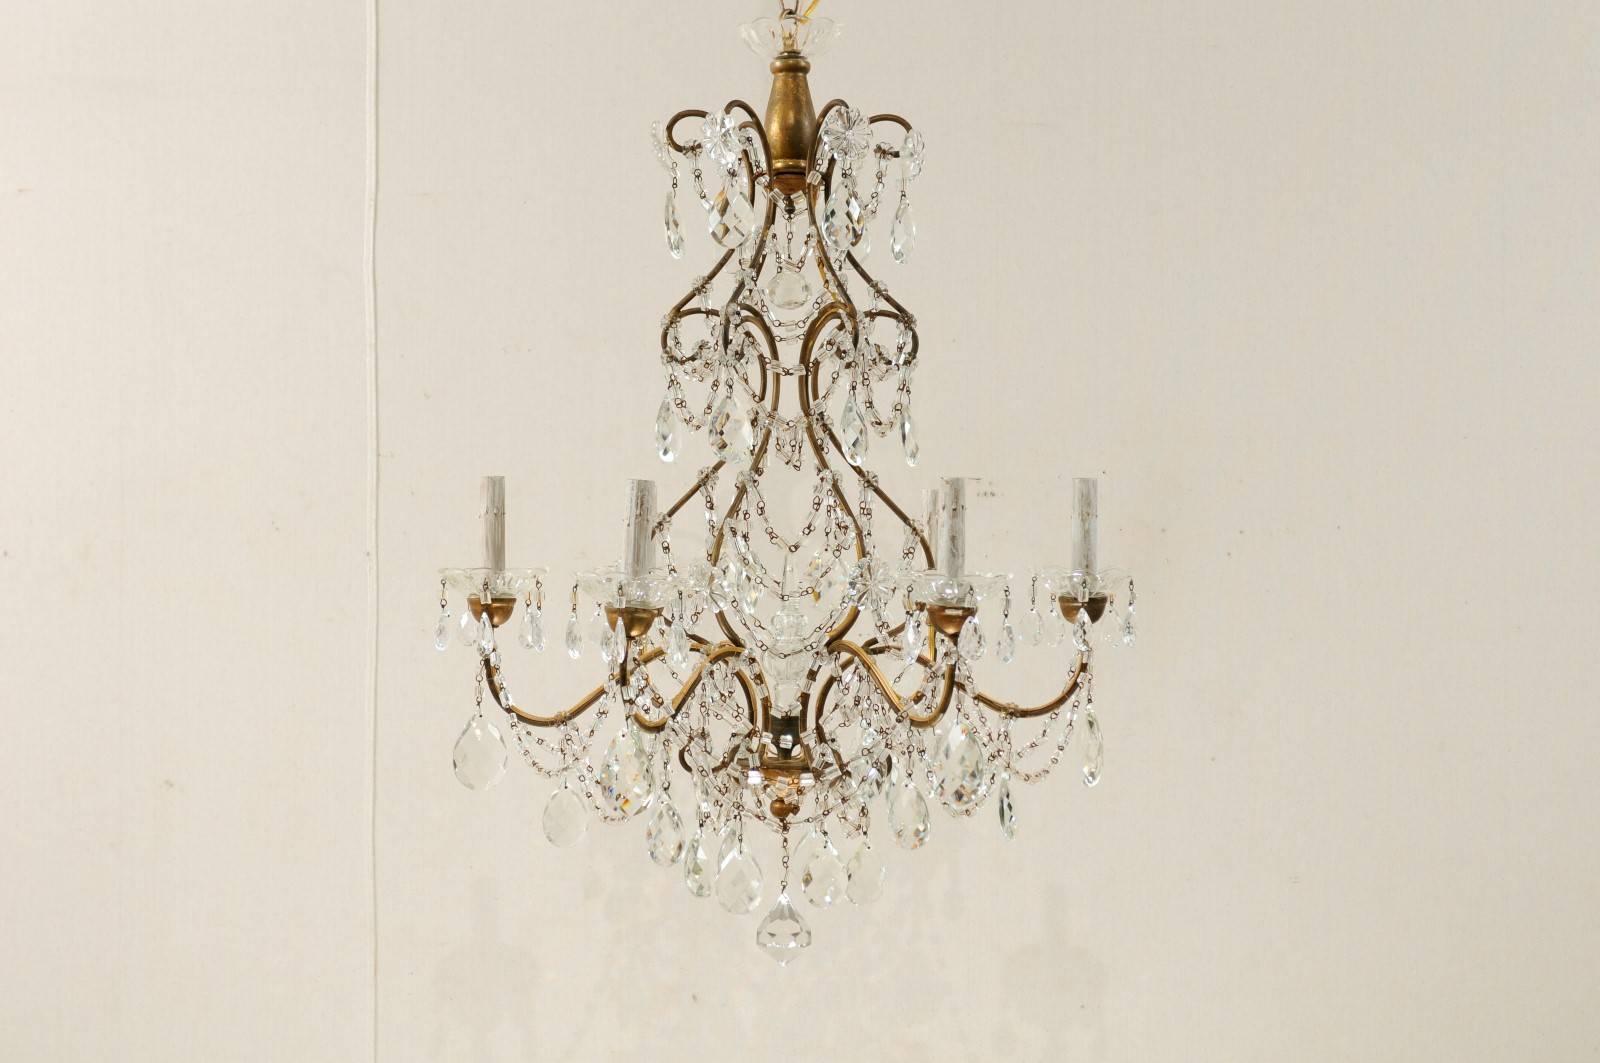 A pair of Italian crystal six-light chandeliers. This Mid-Century pair of Italian chandelier features a scrolled armature adorned with various crystals, strung with Italian glass beads. There is an large vertical crystal within the centre of the